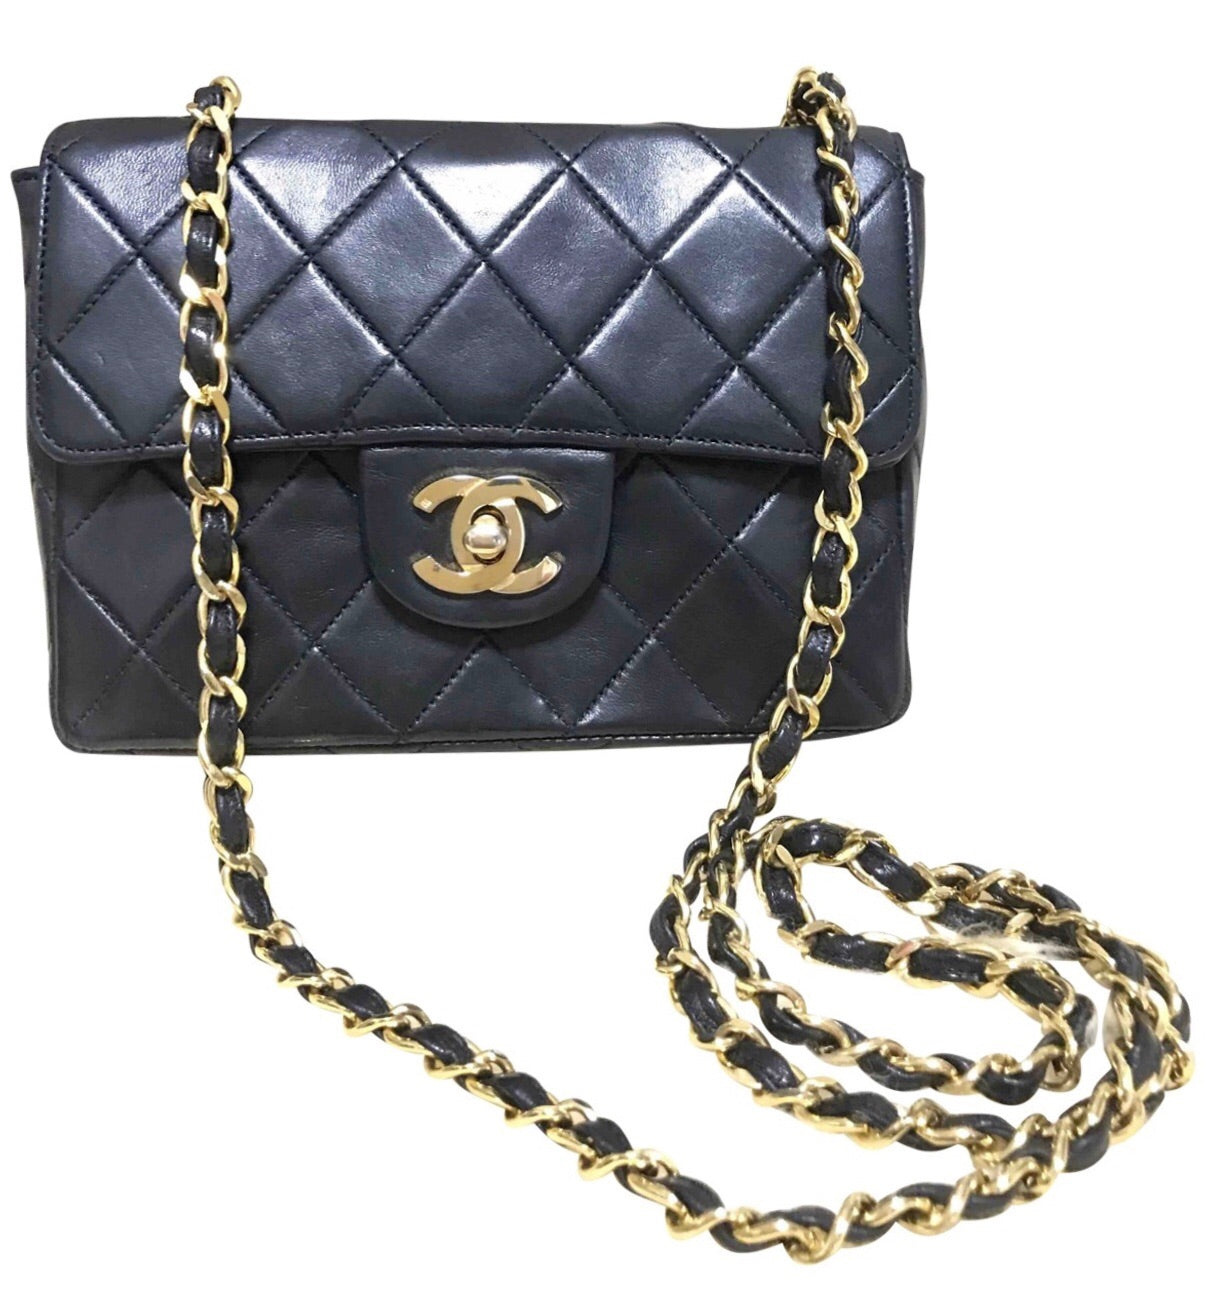 small black chanel bag with gold chain used